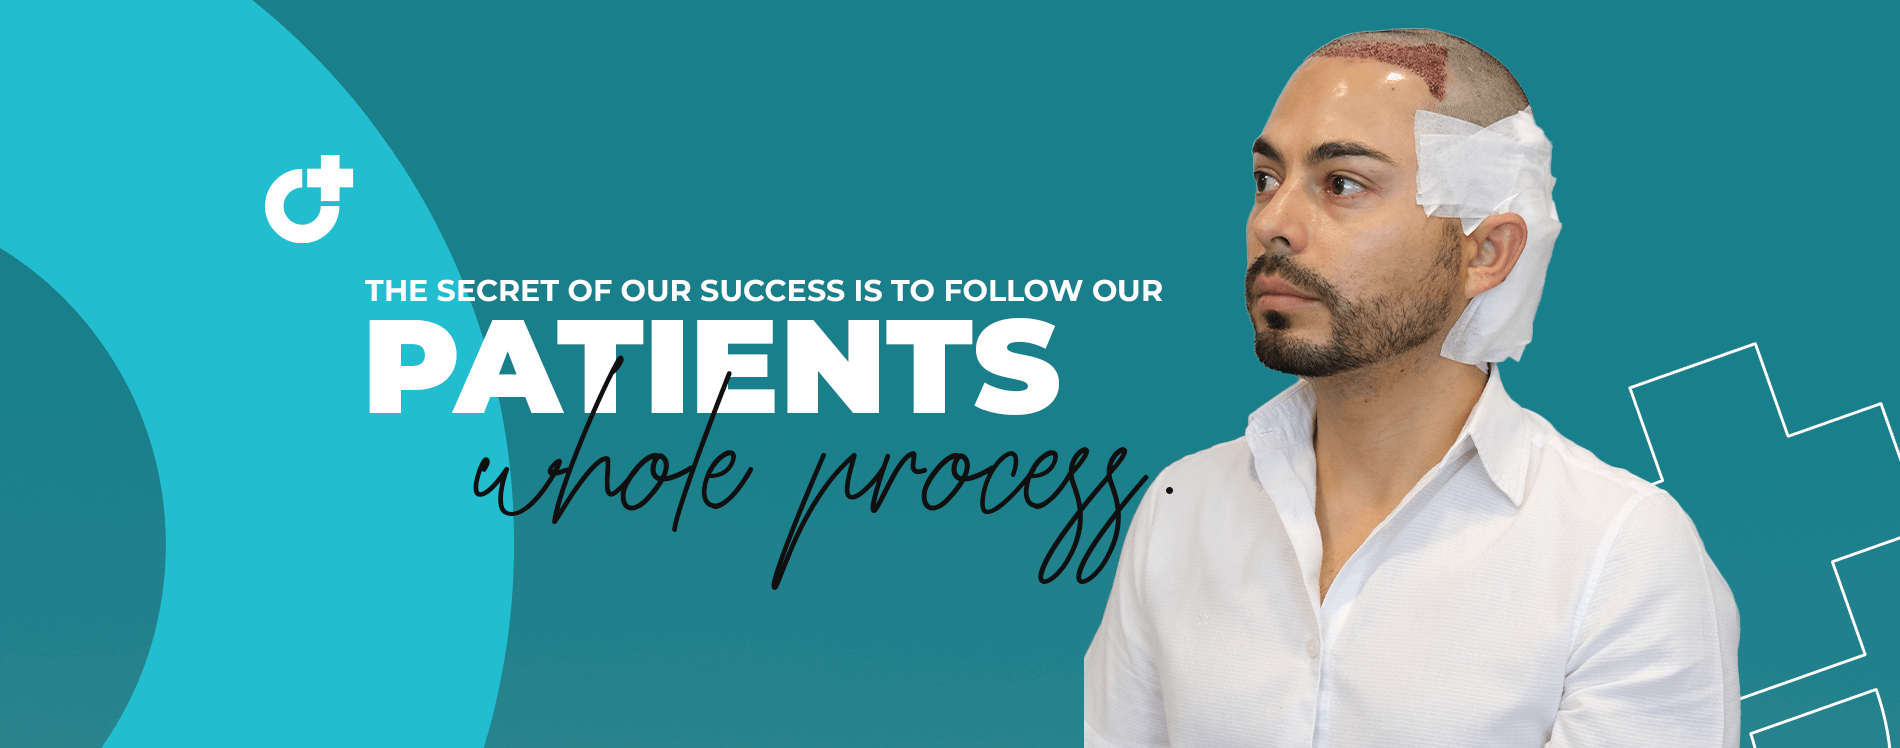 The secret of our success is to follow our patients' whole process.